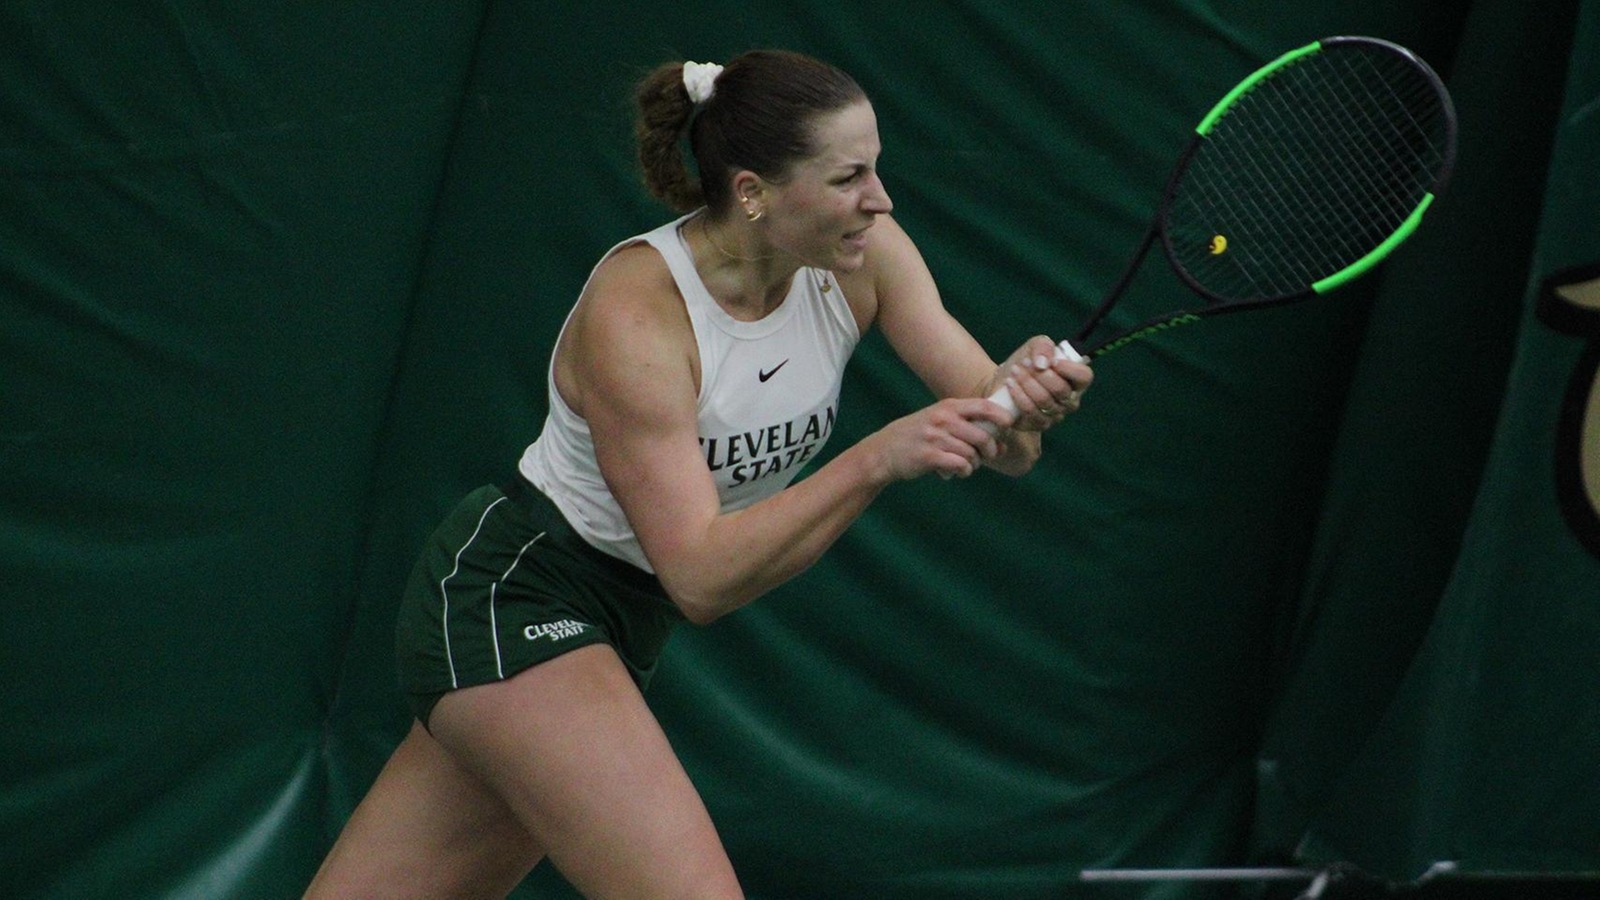 Cleveland State Women’s Tennis Earns 6-1 Win Over Oakland To Open #HLTennis Play